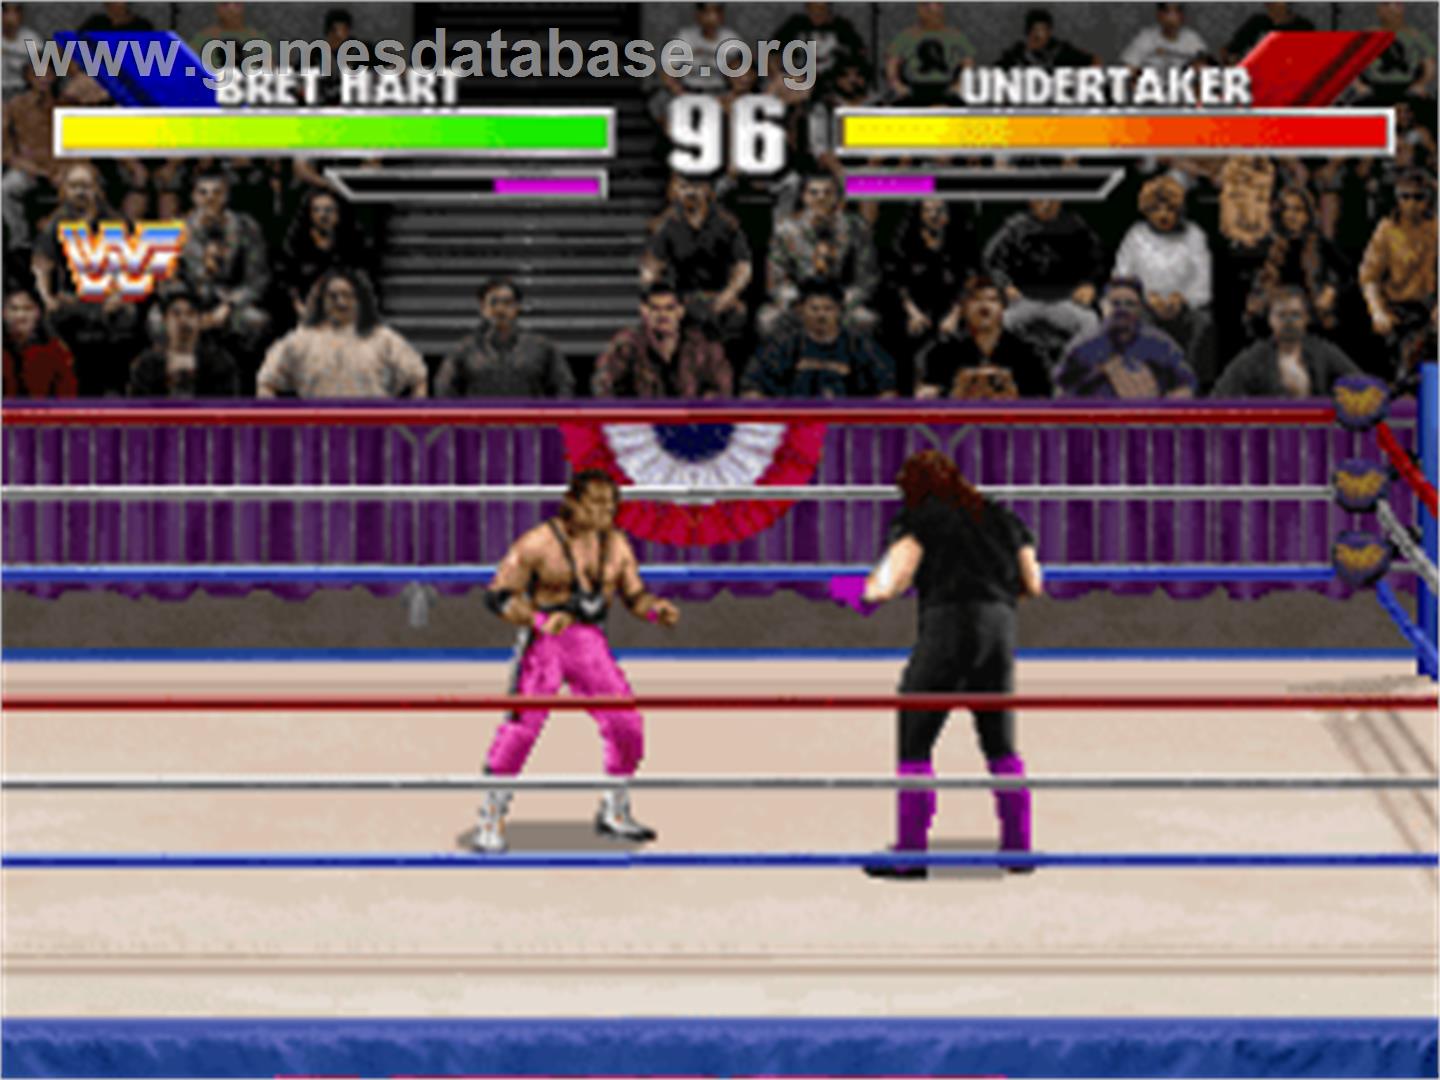 WWF Wrestlemania: The Arcade Game - Sony Playstation - Artwork - In Game